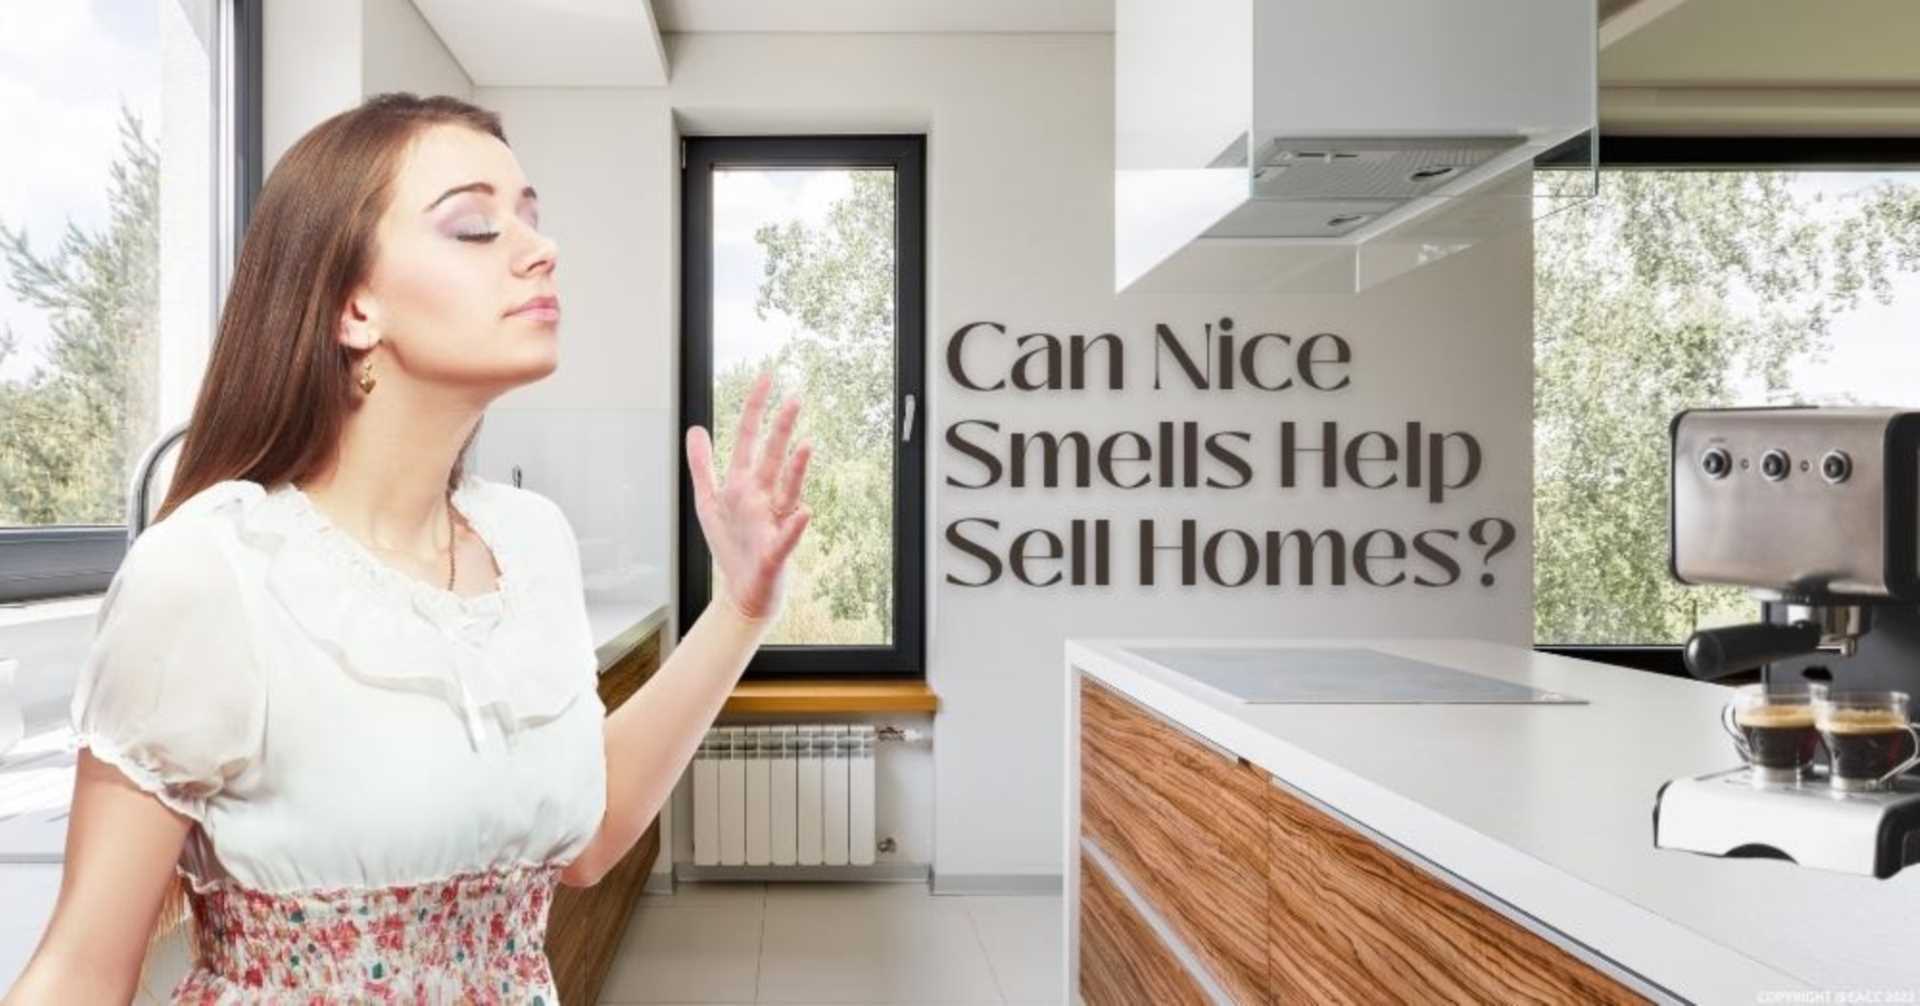 Can Nice Smells Help Sell Homes?